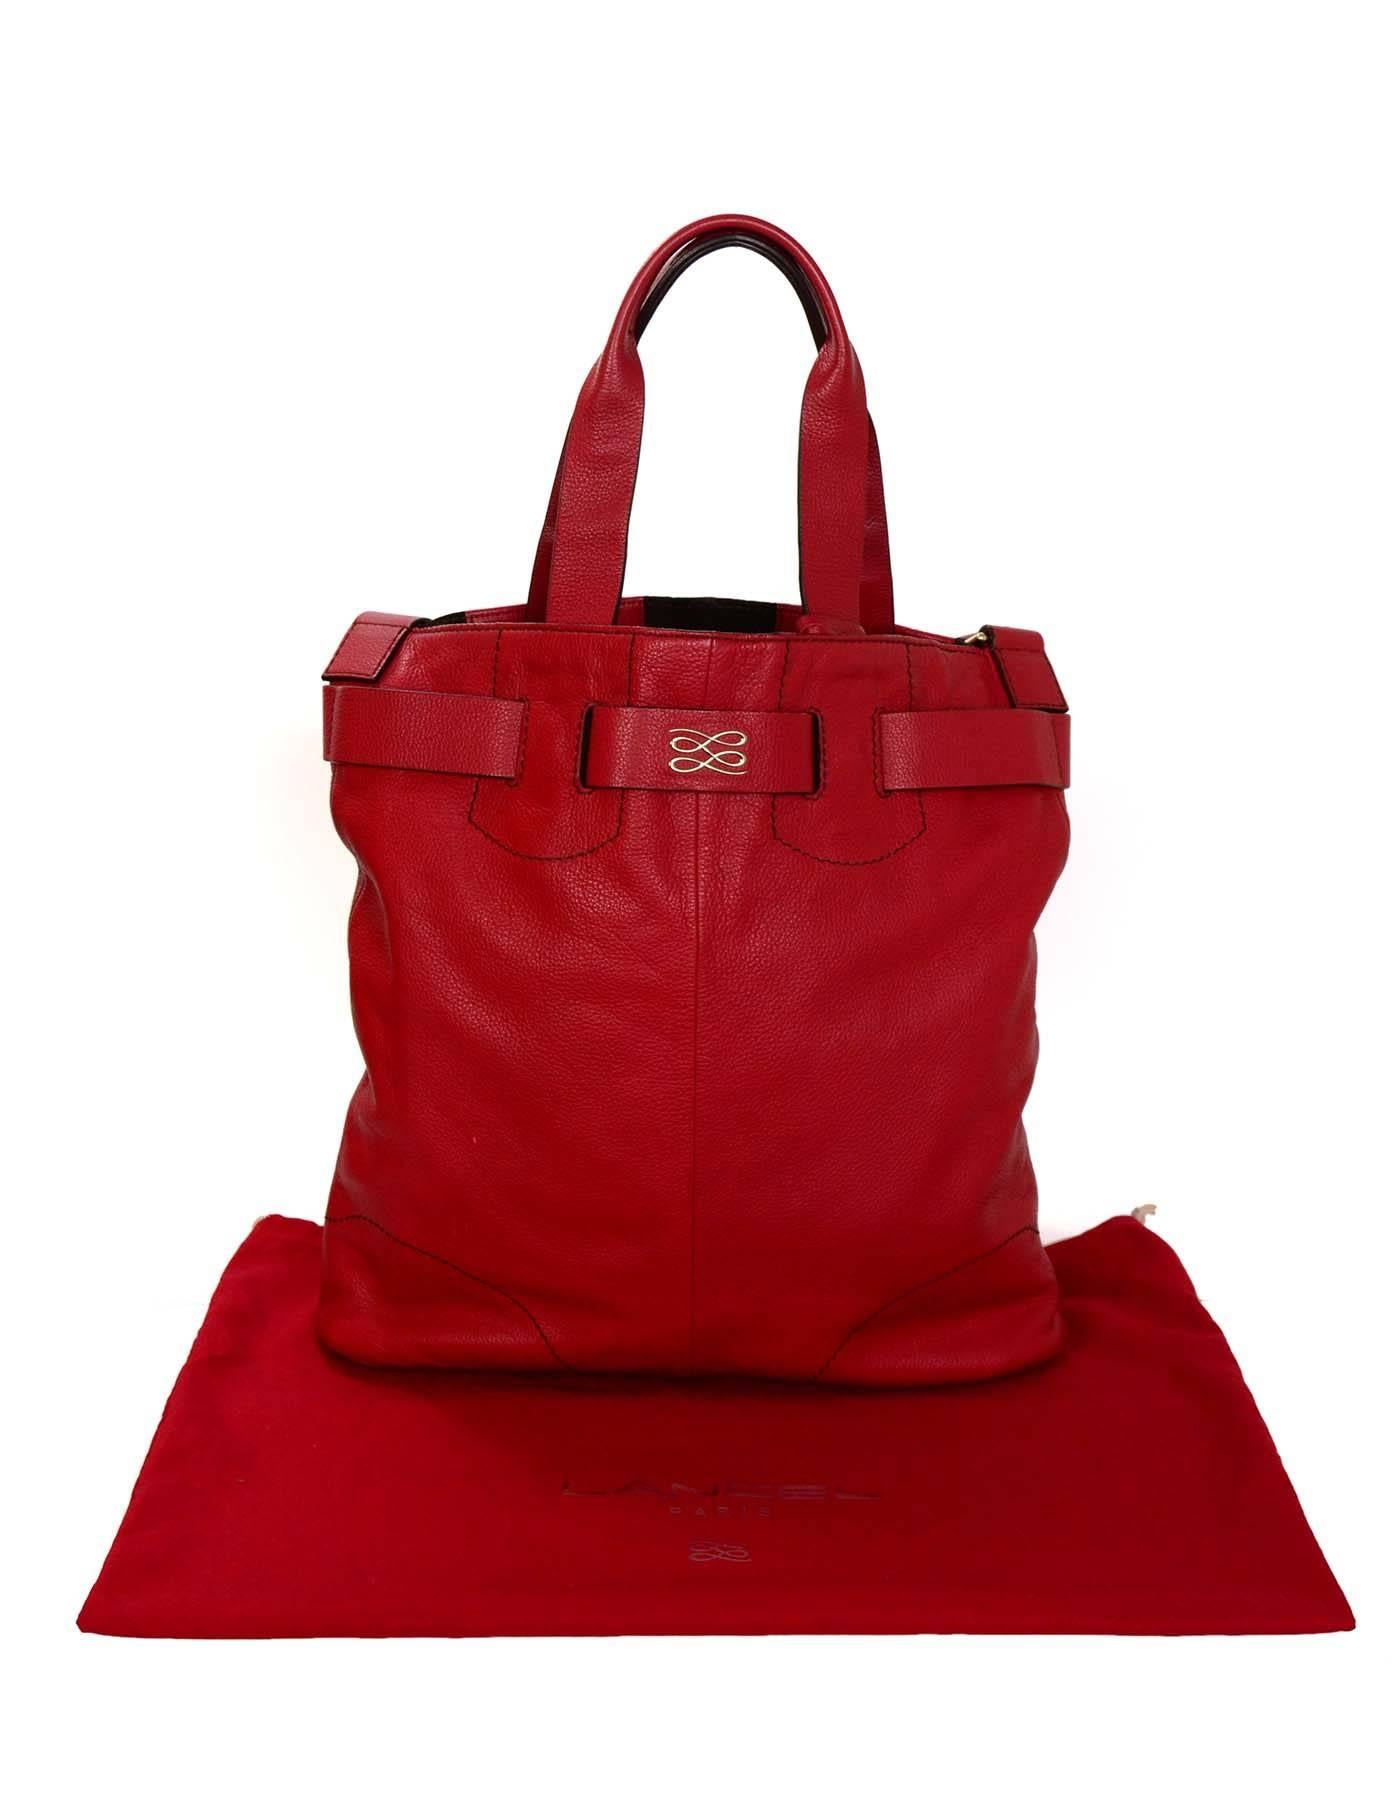  Lancel Red Leather Tote Bag w. Crossbody Strap 5